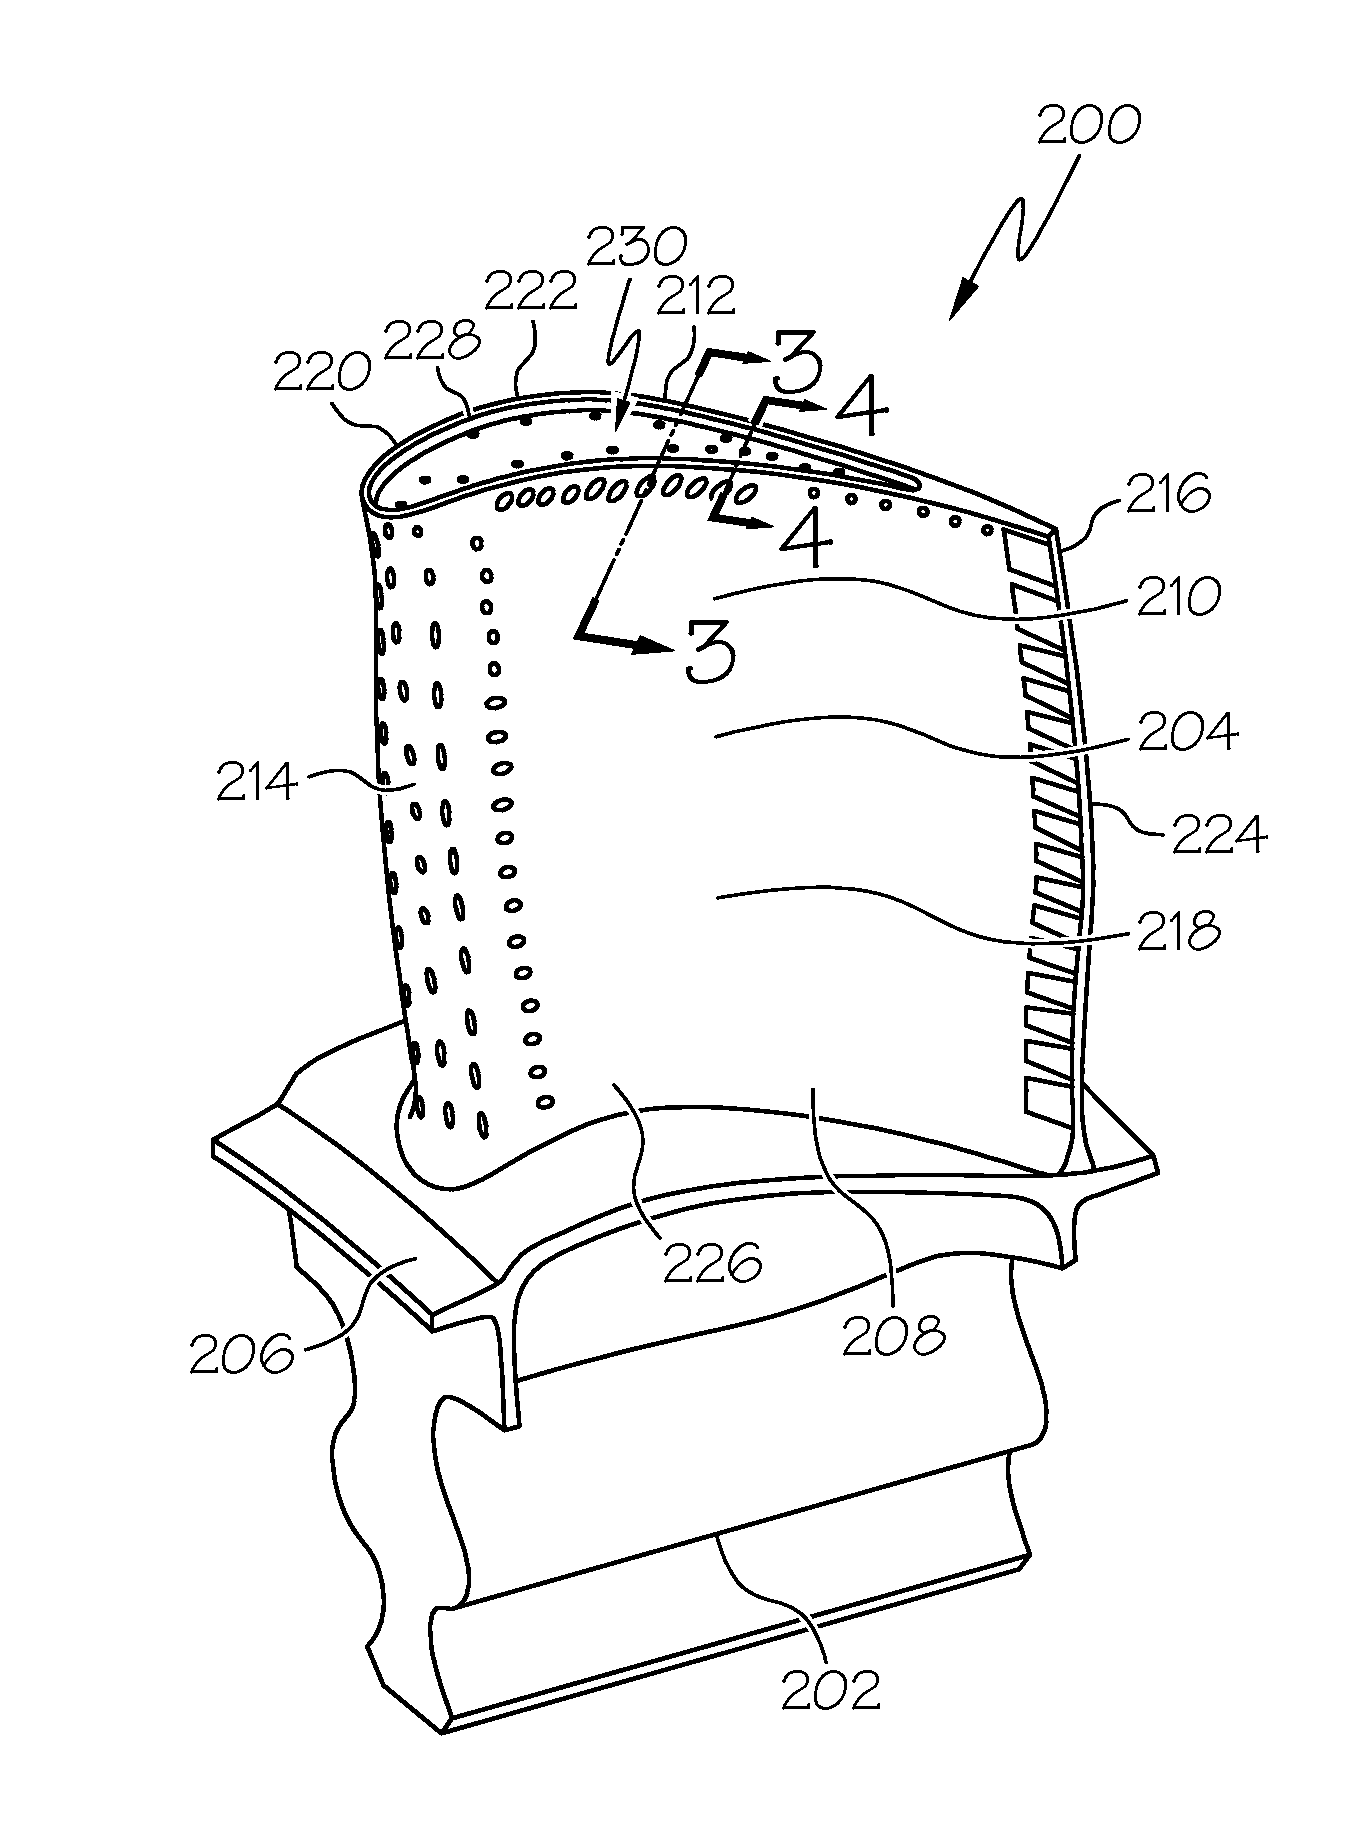 Blades, turbine blade assemblies, and methods of forming blades